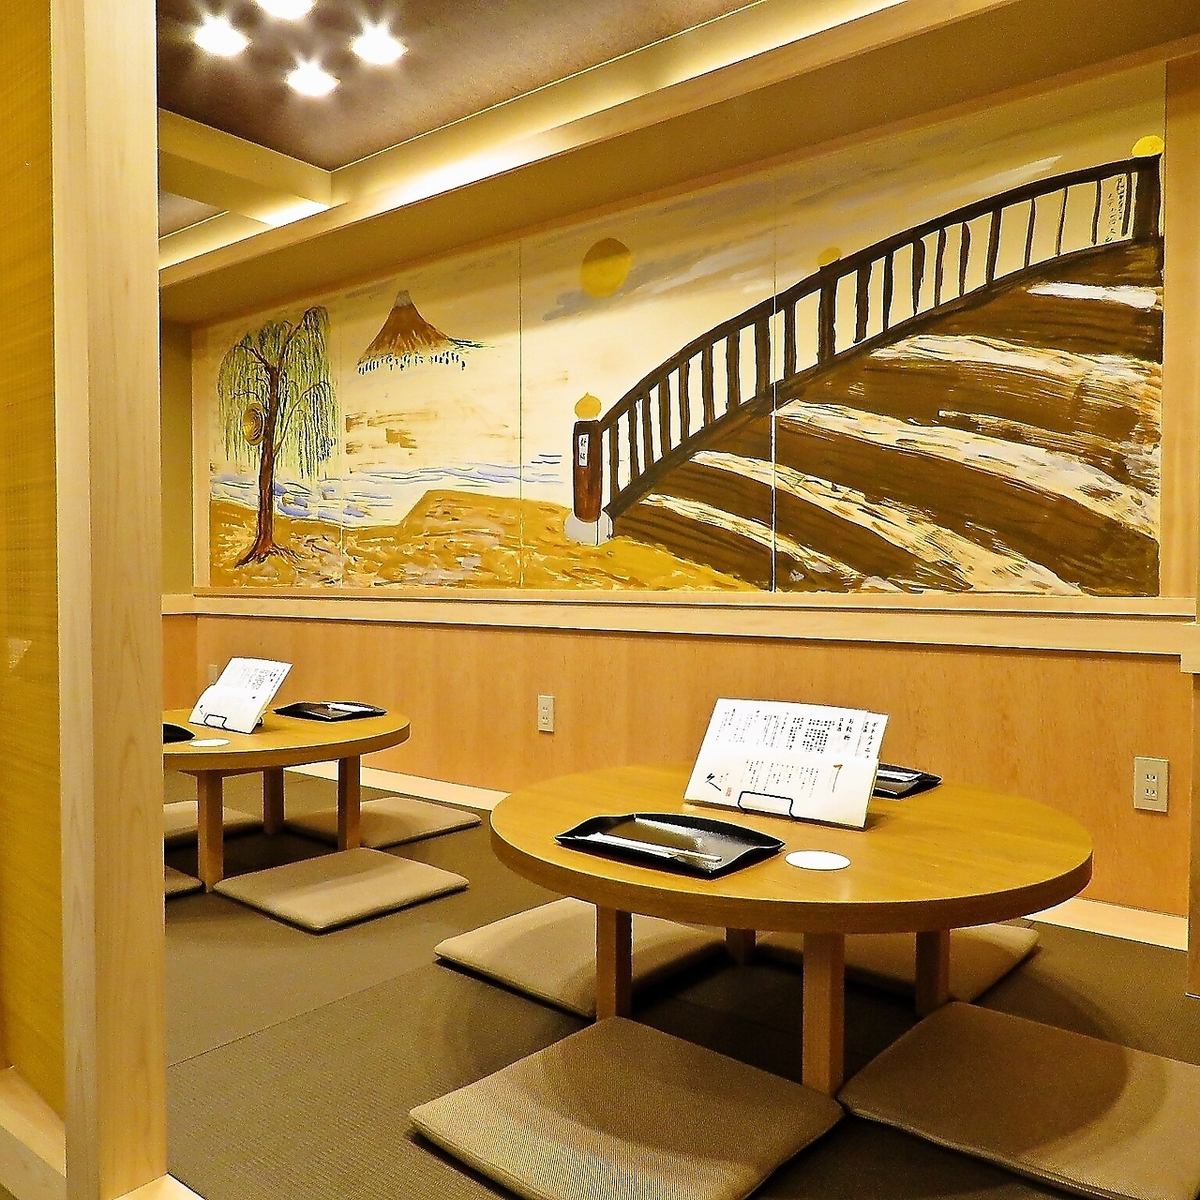 [In the tatami room] You can take off your shoes and relax.